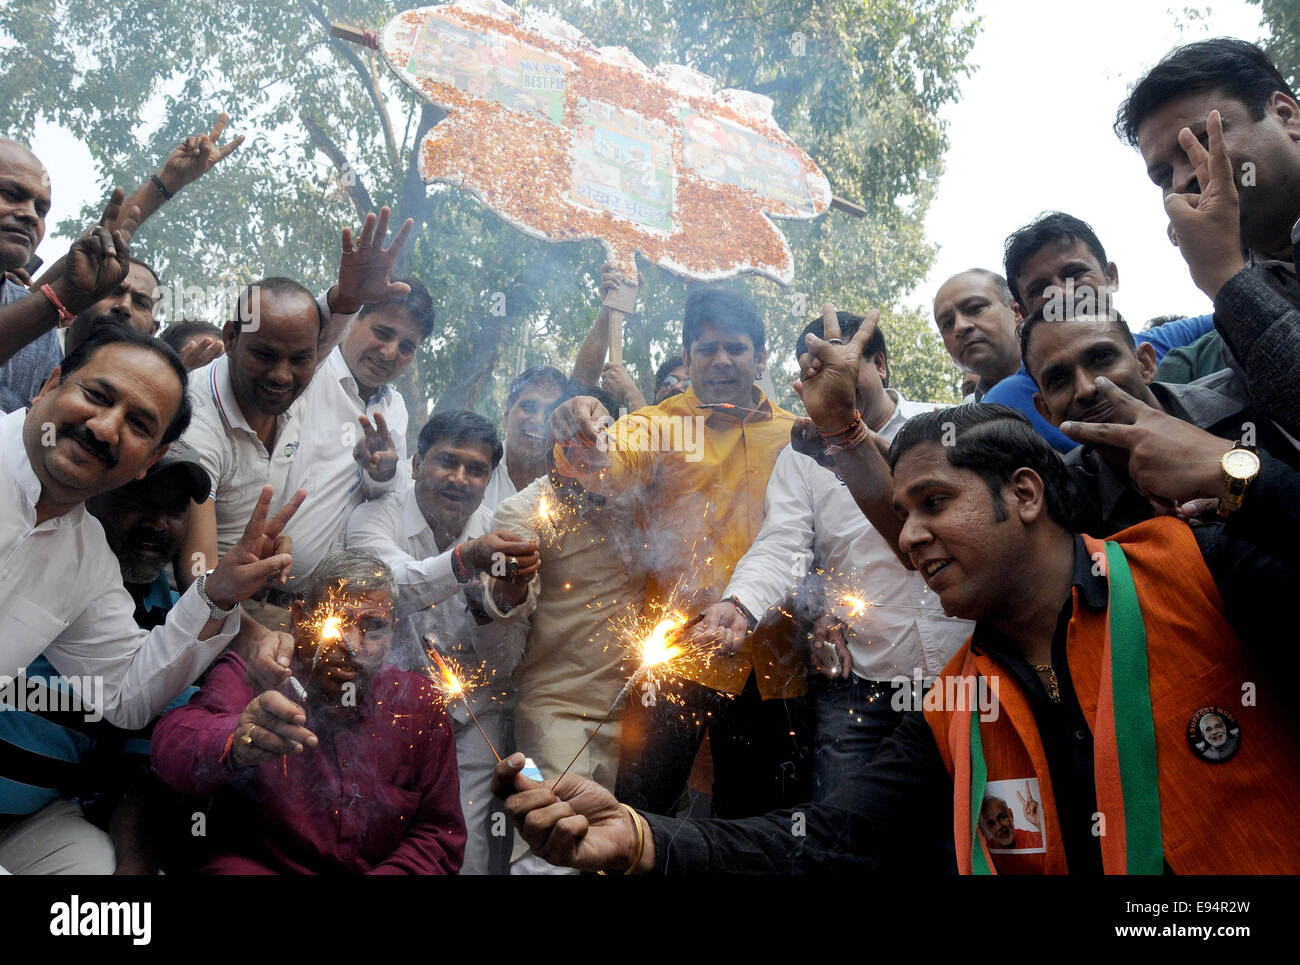 New Delhi. 19th Oct, 2014. Bharatiya Janata Party (BJP) supporters celebrate outside the BJP headquarters as Haryana and Maharashtra states assembly elections results come out in New Delhi, India on Oct.19, 2014. India's ruling BJP has won control of the country's financial capital Mumbai through a legislative election in the state of Maharashtra, while also grasping the northern state of Haryana from the Congress, said vote counting results Sunday. Credit:  Partha Sarkar/Xinhua/Alamy Live News Stock Photo